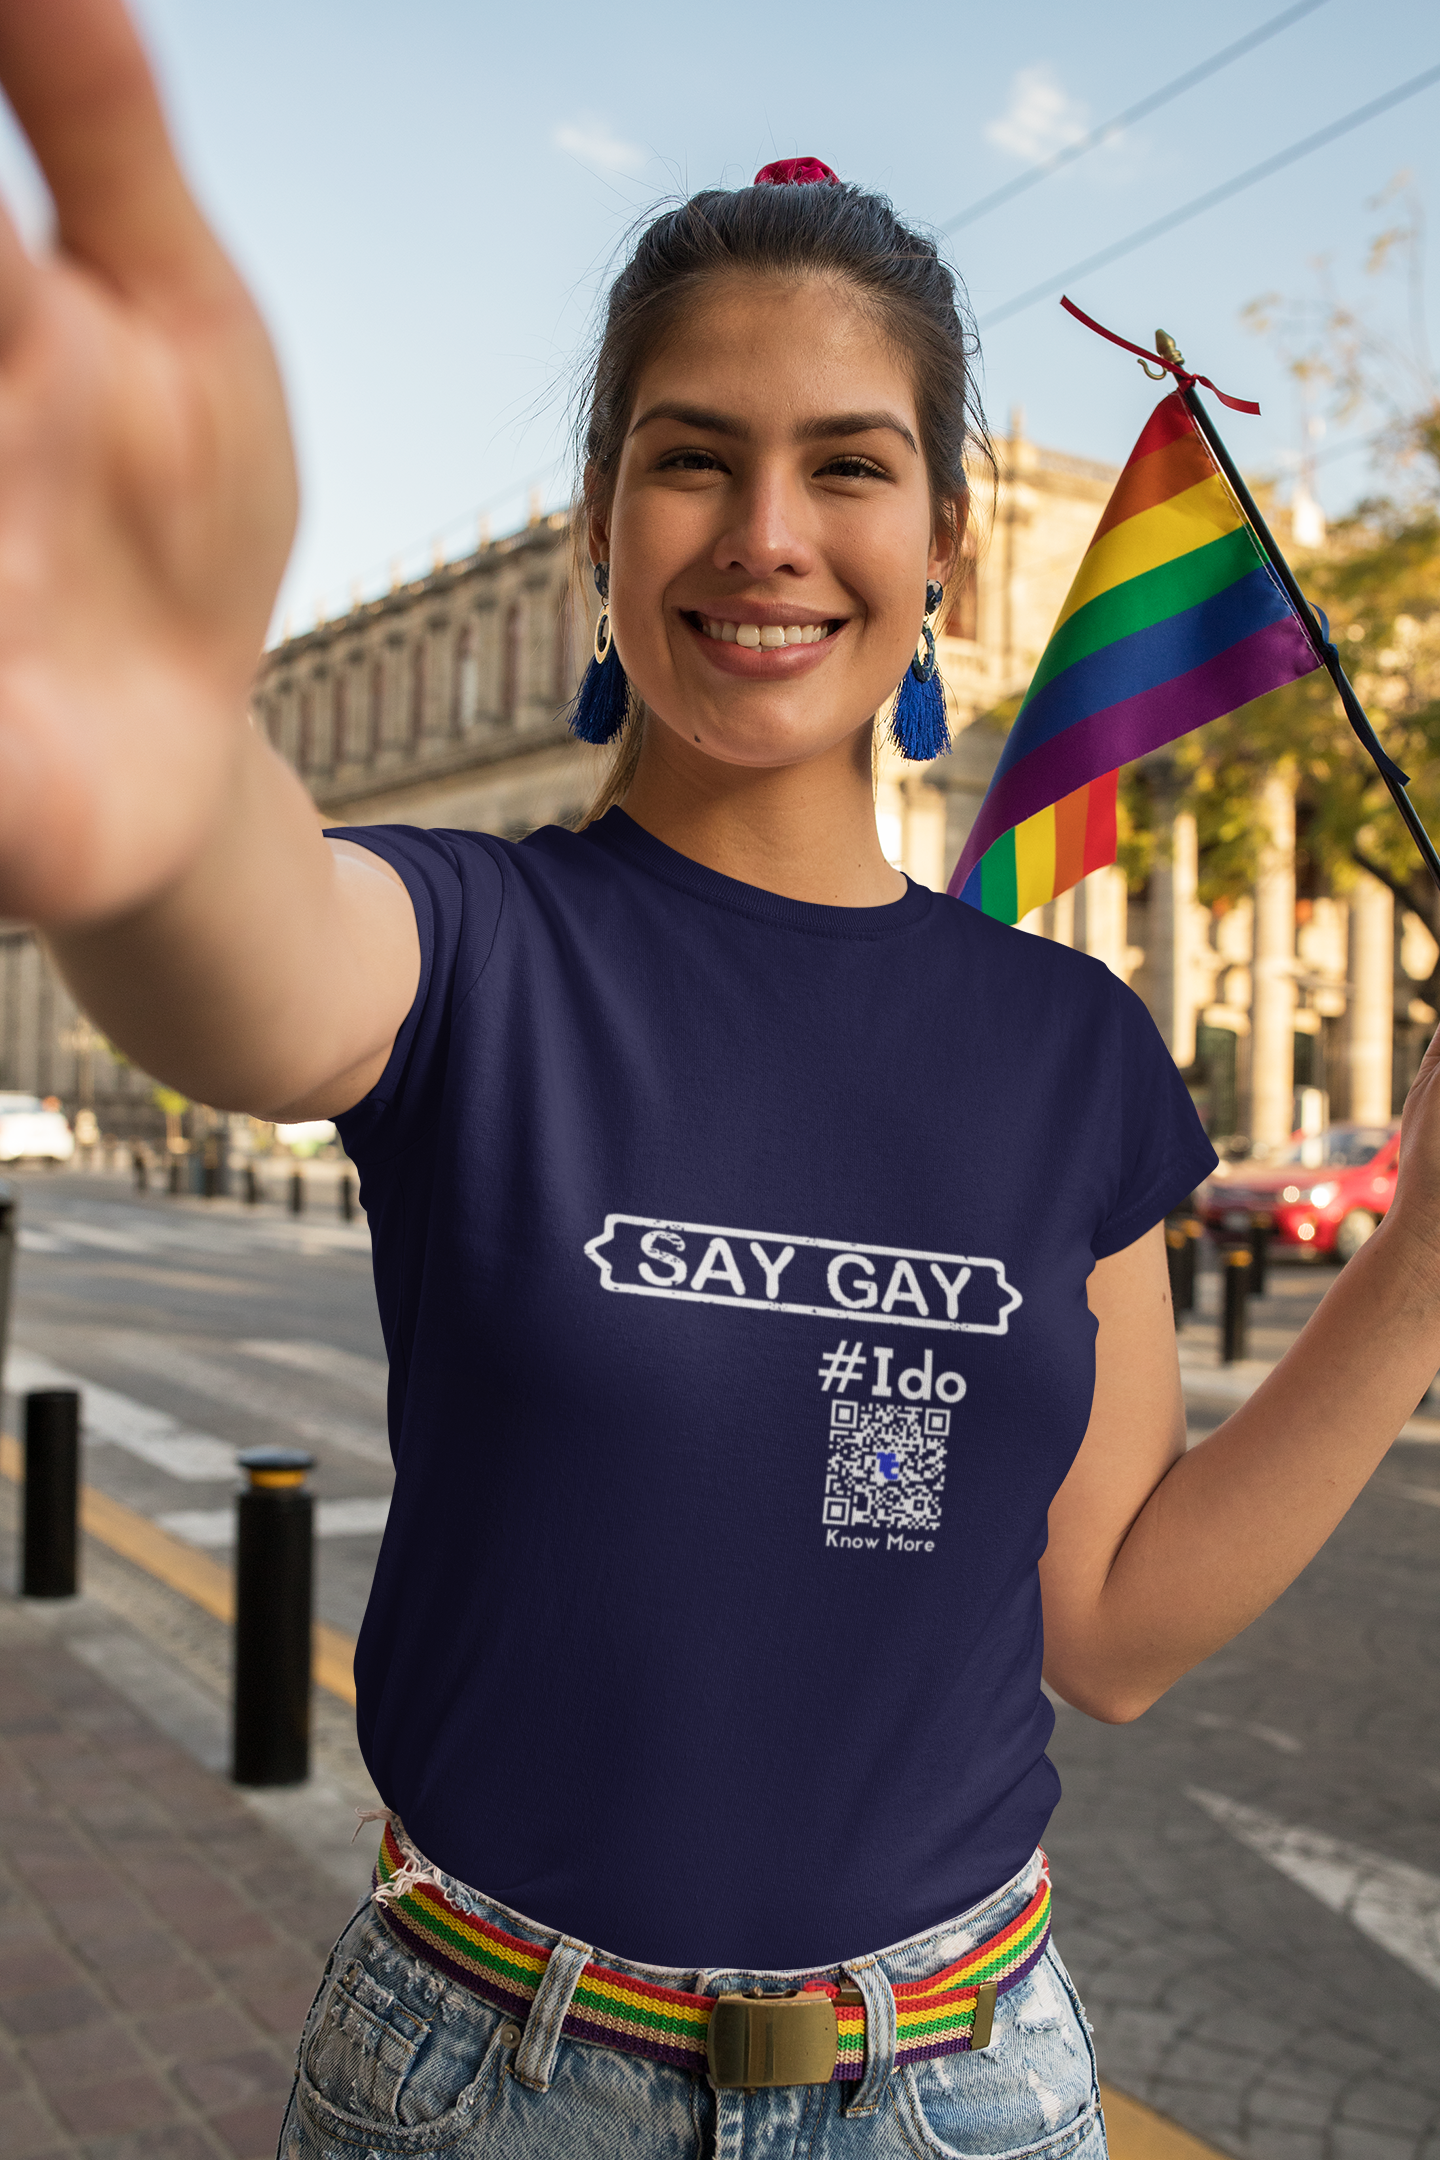 A person is walking on a city street, smiling, holding a rainbow pride flag looking directly at the camera. They're wearing a navy blue CLAIM It Tee™.  The CLAIM™ reads {SAY GAY} #Ido. The qr code is easy to read.